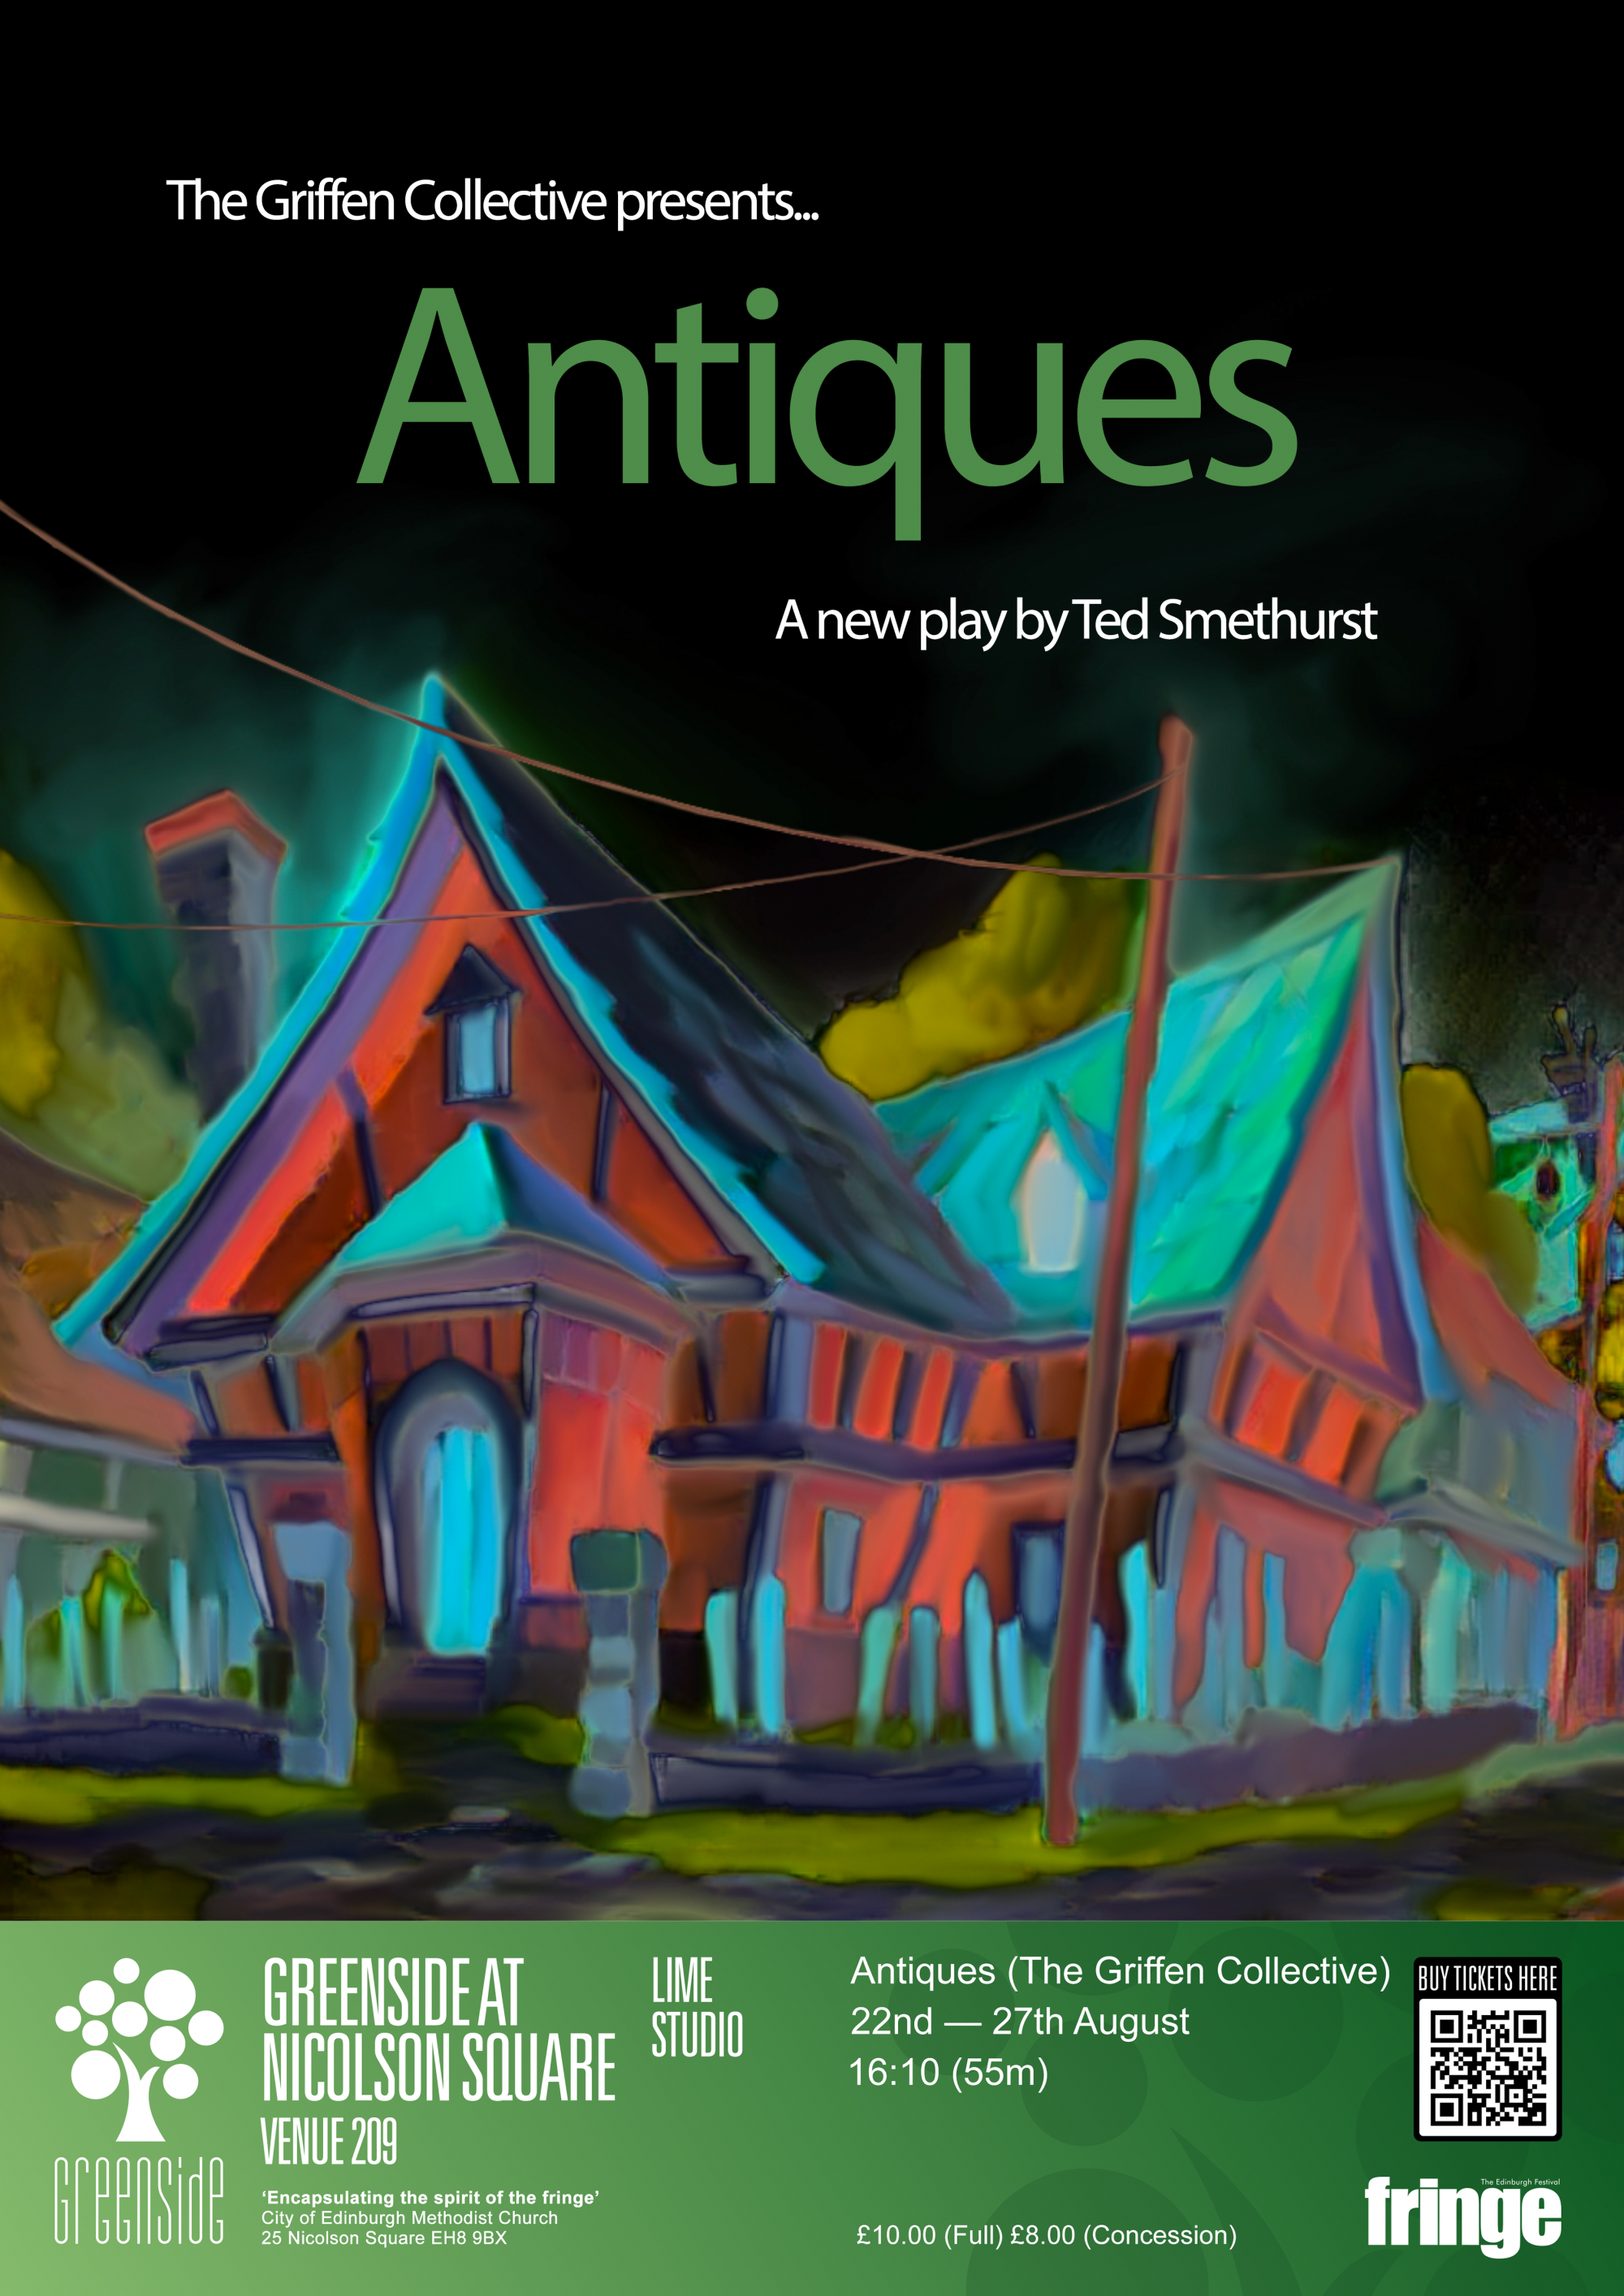 Poster advertising the show 'Antiques' featuring a brightly coloured eerie house on a black bacground.